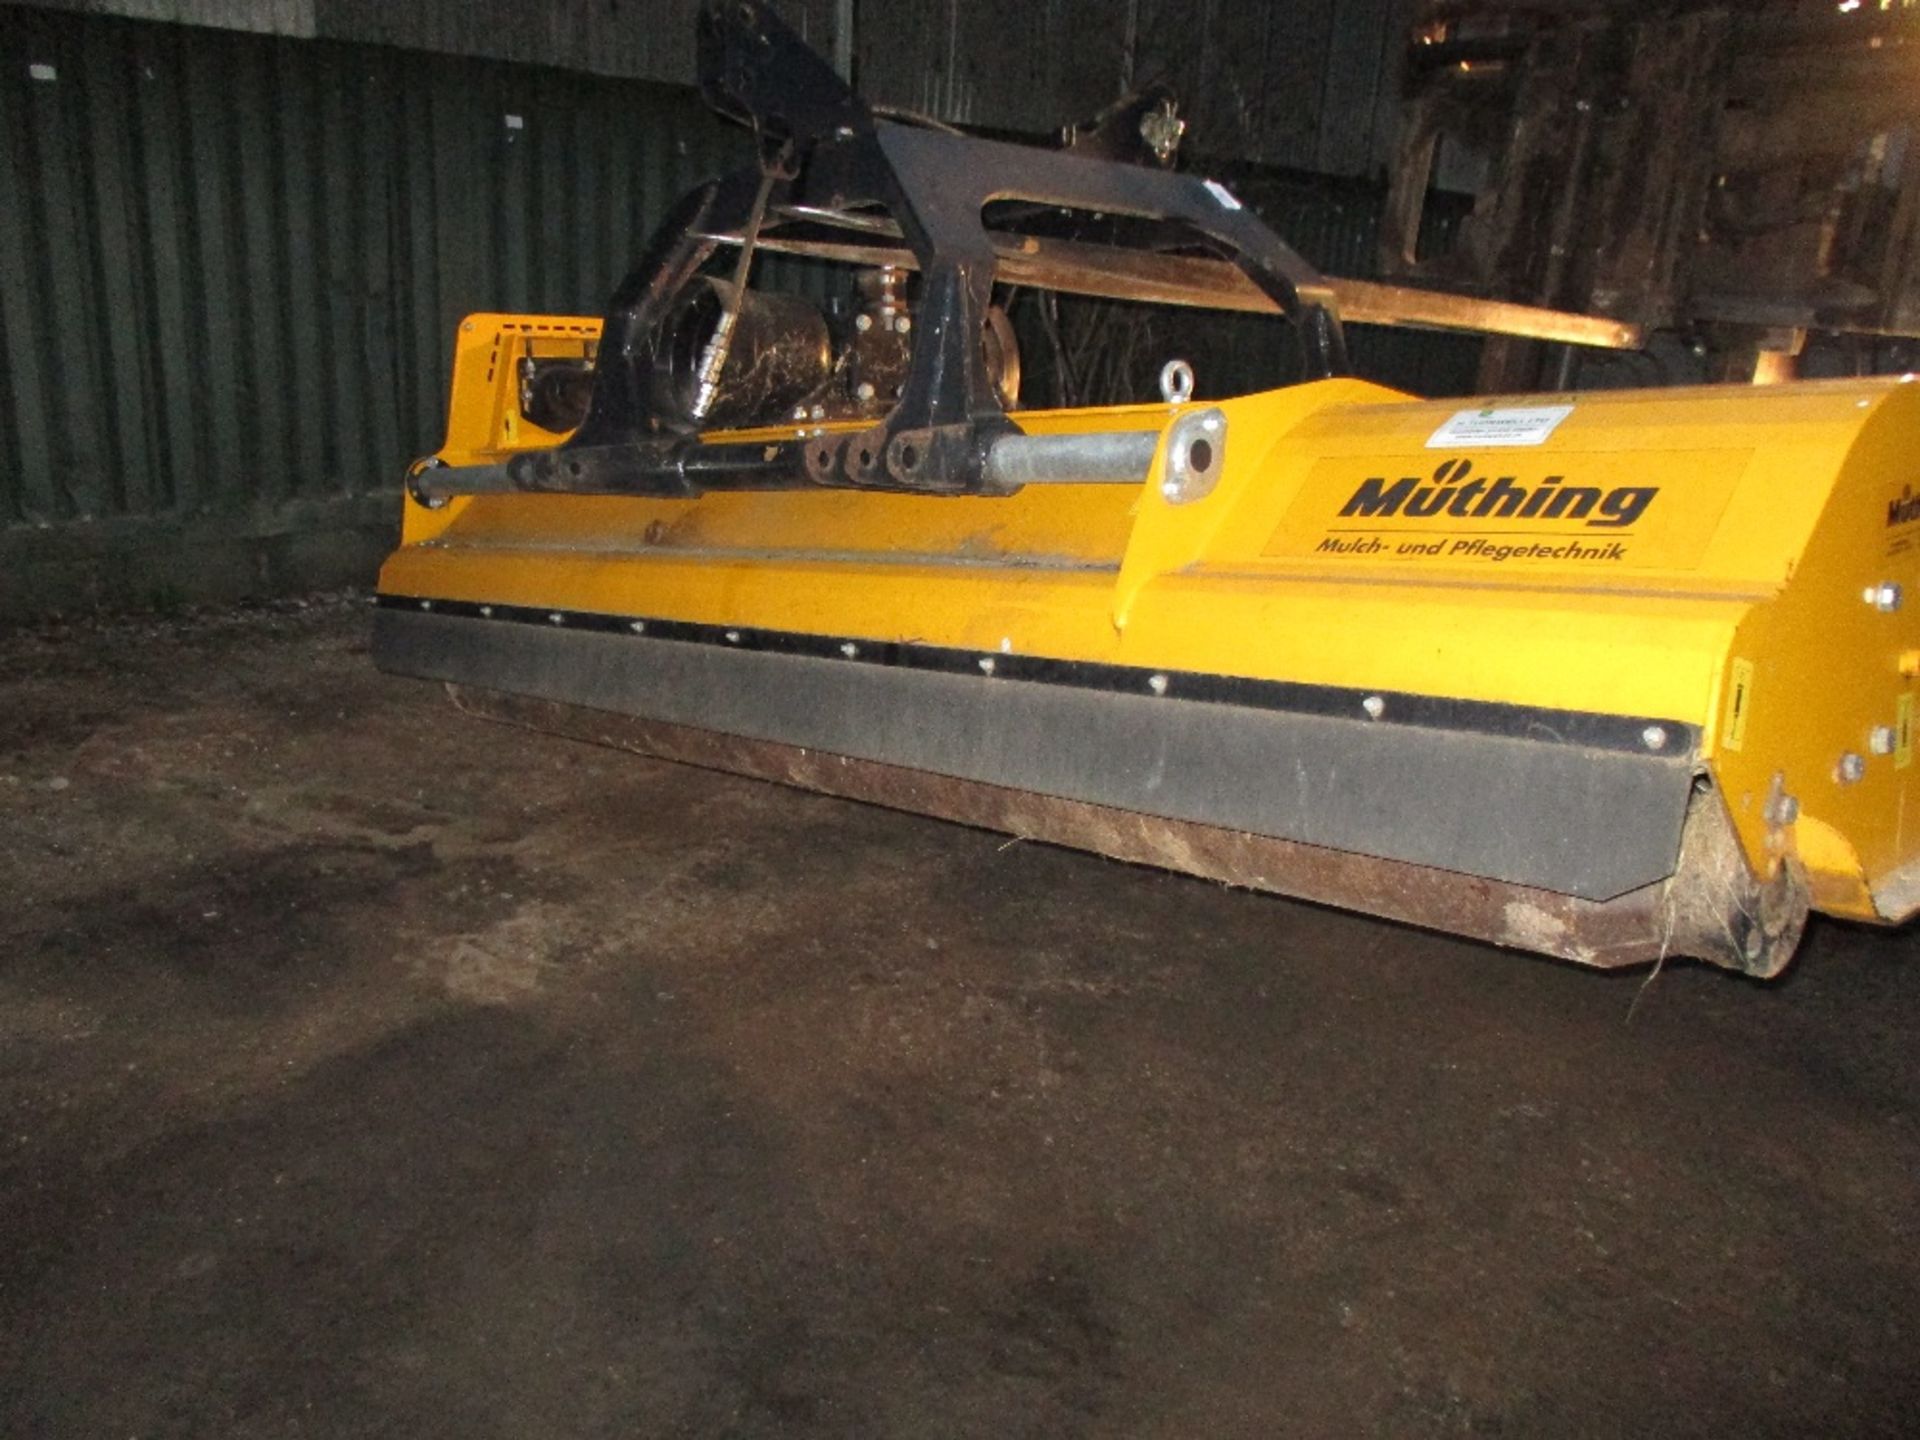 MUTHING MUL 280 FRONT OR REAR DRIVE OFFSET FLAIL MOWER YEAR 2010 BUILD